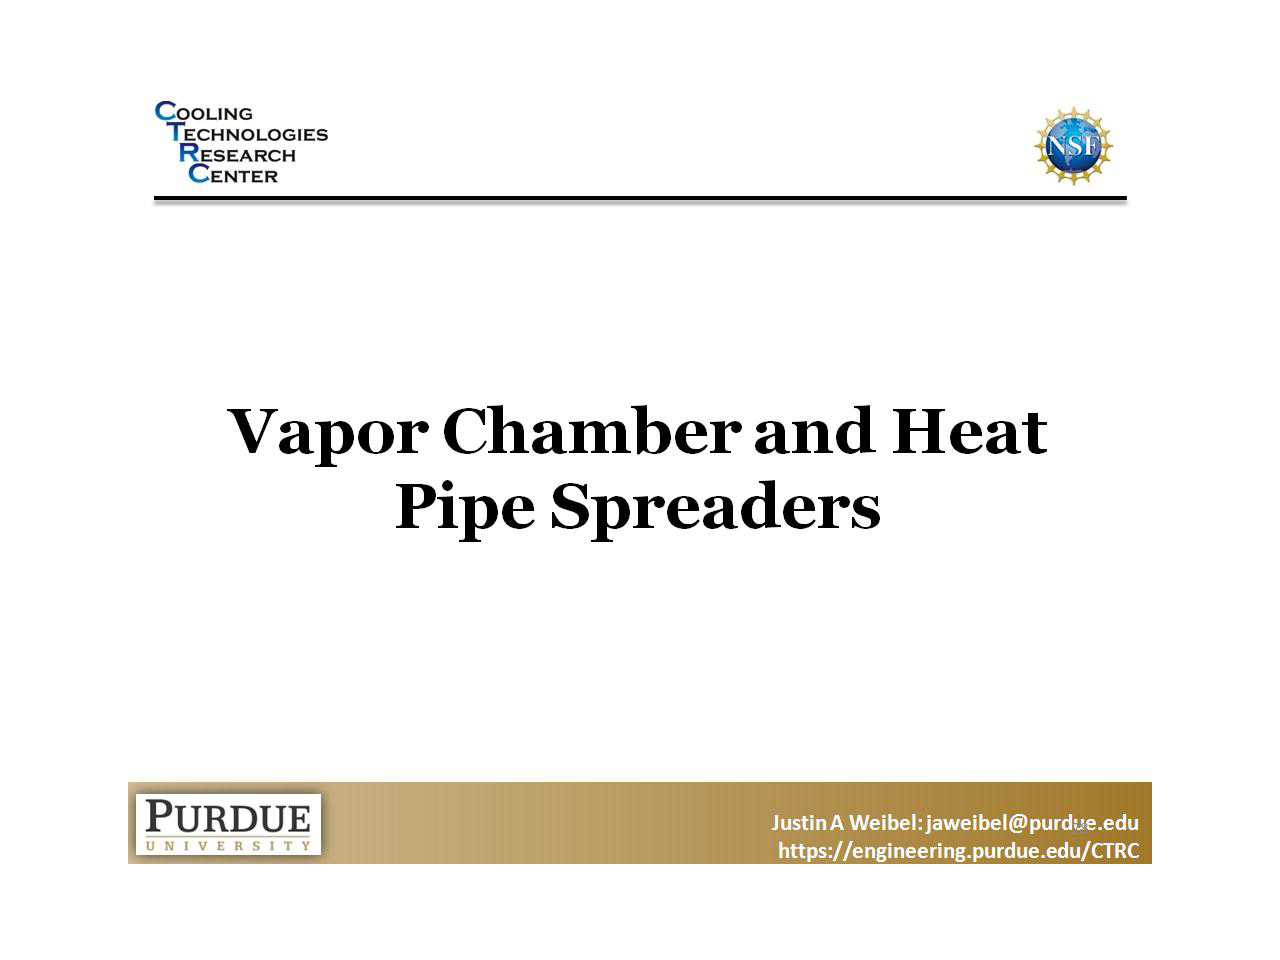 Vapor Chamber and Heat Pipe Spreaders